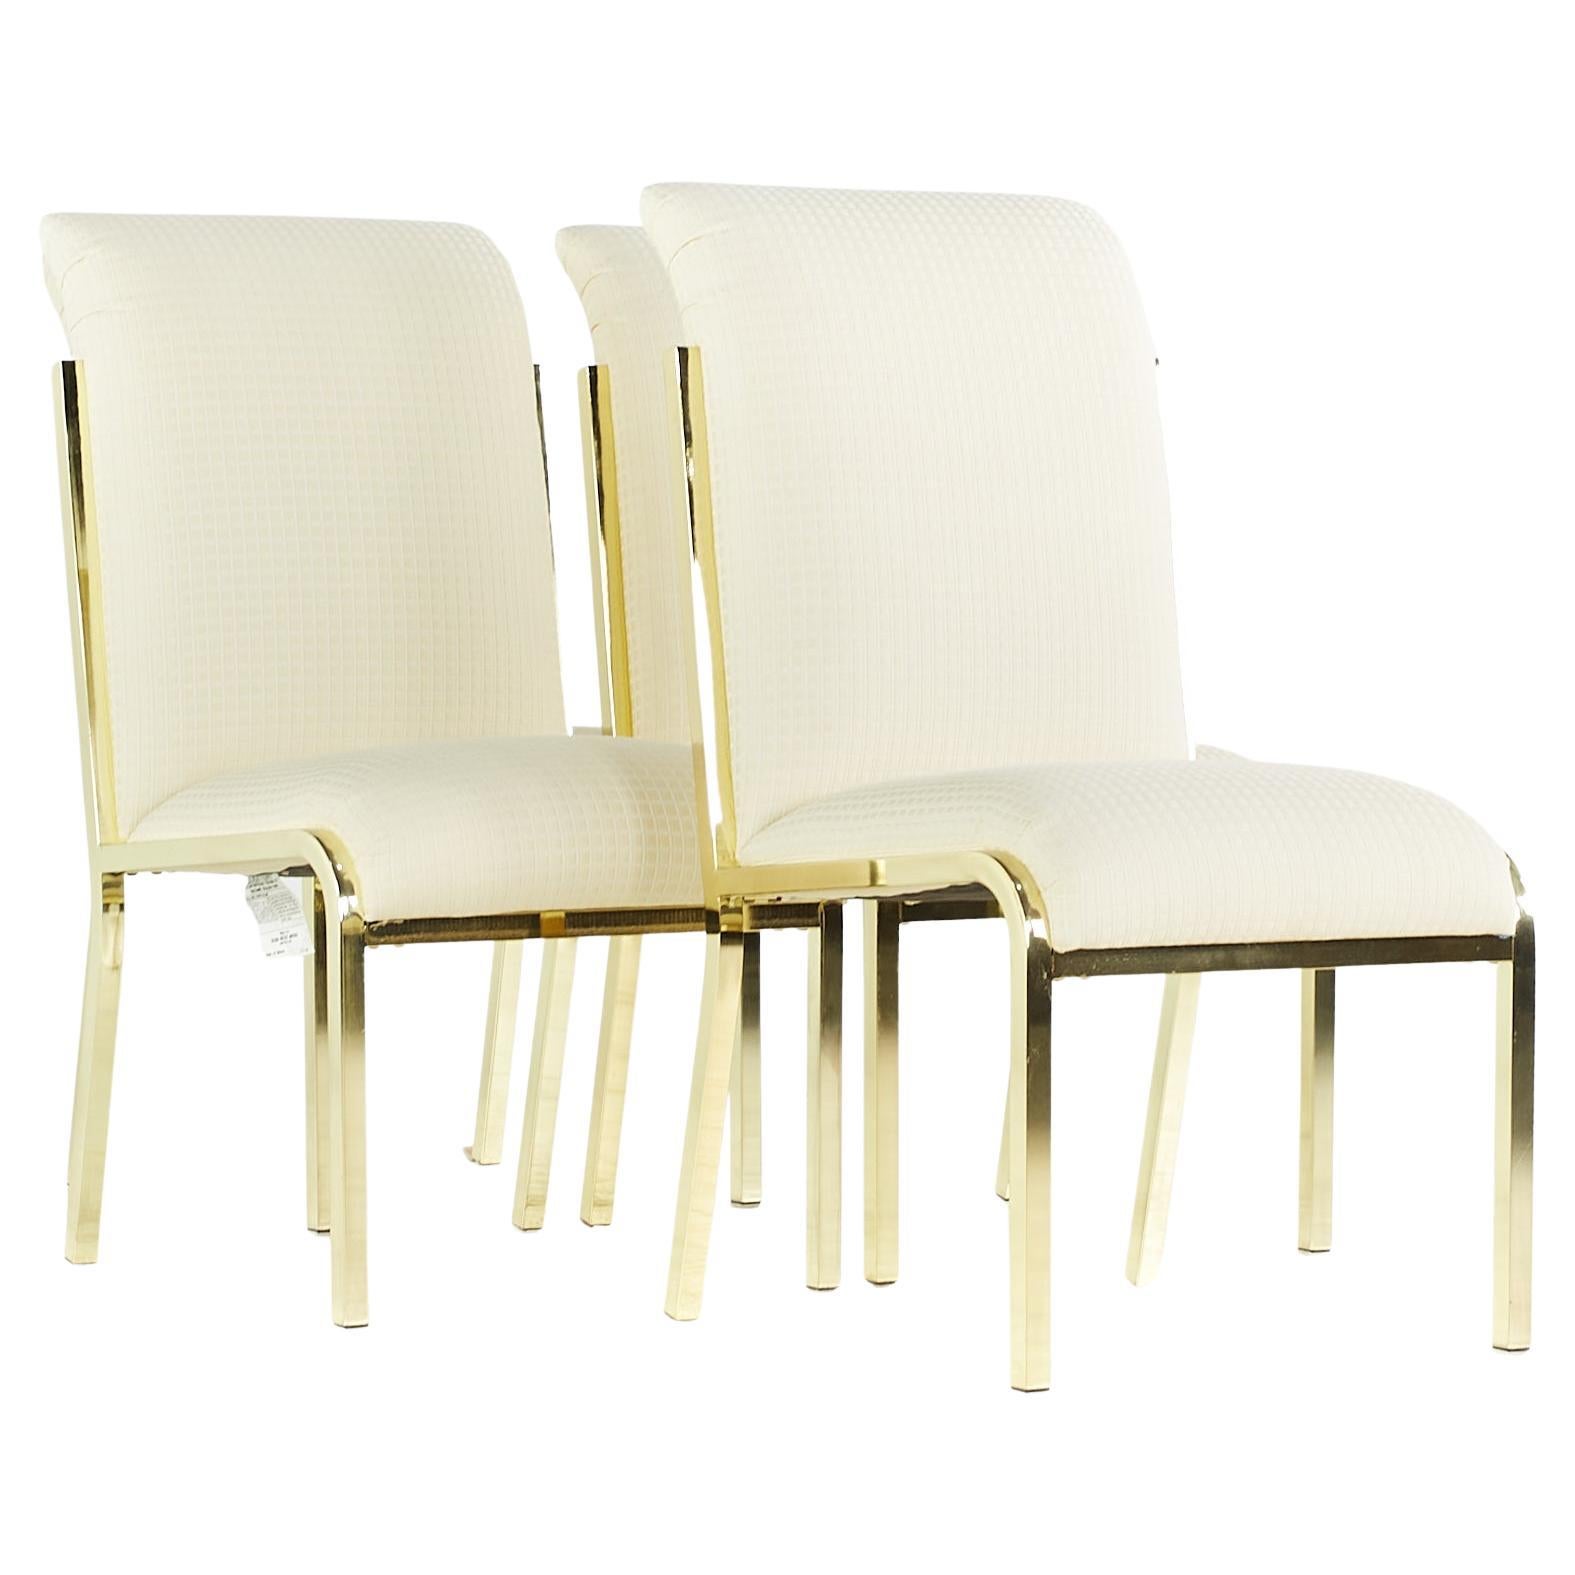 Milo Baughman Style Mid Century Brass Dining Chairs - Set of 4 For Sale